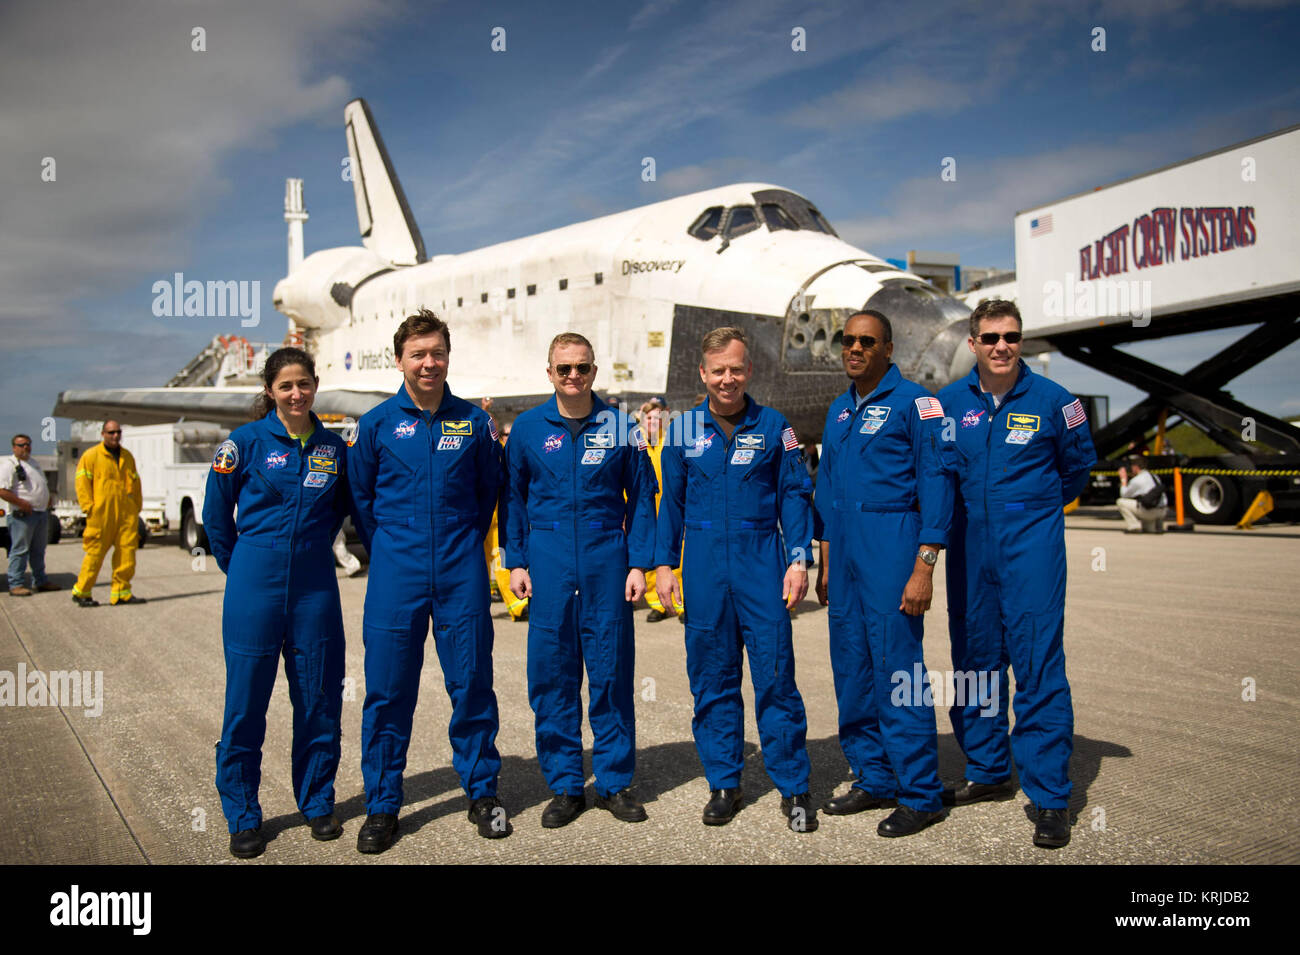 NASA Astronauts and STS-133 mission crew members, from left, Mission Specialists Nicole Stott, Michael Barratt, Pilot Eric Boe, Commander Steve Lindsey, Mission Specialists Alvin Drew, and Steve Bowen pose for a photograph in front of the space shuttle Discovery after they landed, Wednesday, March 9, 2011, at Kennedy Space Center in Cape Canaveral, Fla., completing Discovery's 39th and final flight.  Since 1984, Discovery flew 39 missions, spent 365 days in space, orbited Earth 5,830 times and traveled 148,221,675 miles.  Photo credit: (NASA/Bill Ingalls) STS-133 crew on the tarmac Stock Photo